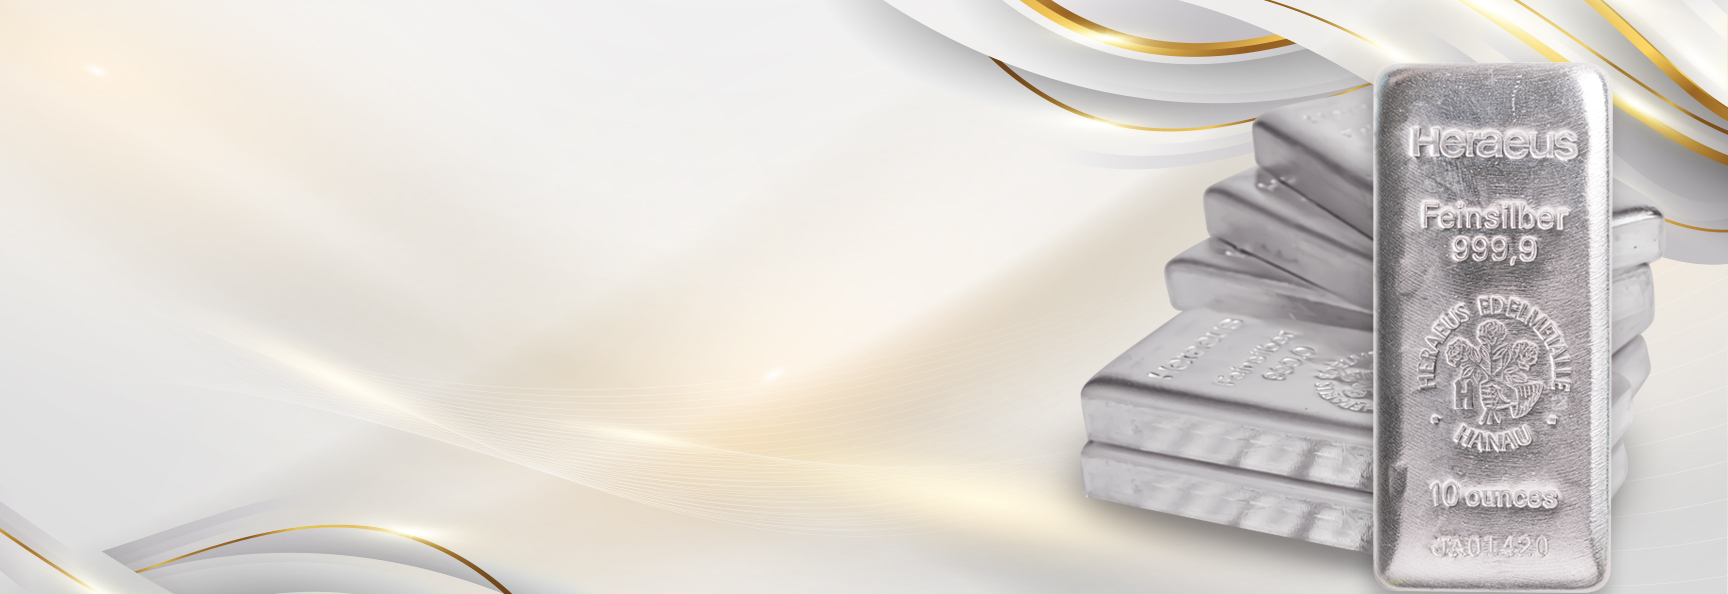 Buy & Store Bullion with BullionStar in the United States! Buy a 10 oz Heraeus Silver Bar for the Spot Price of Silver!